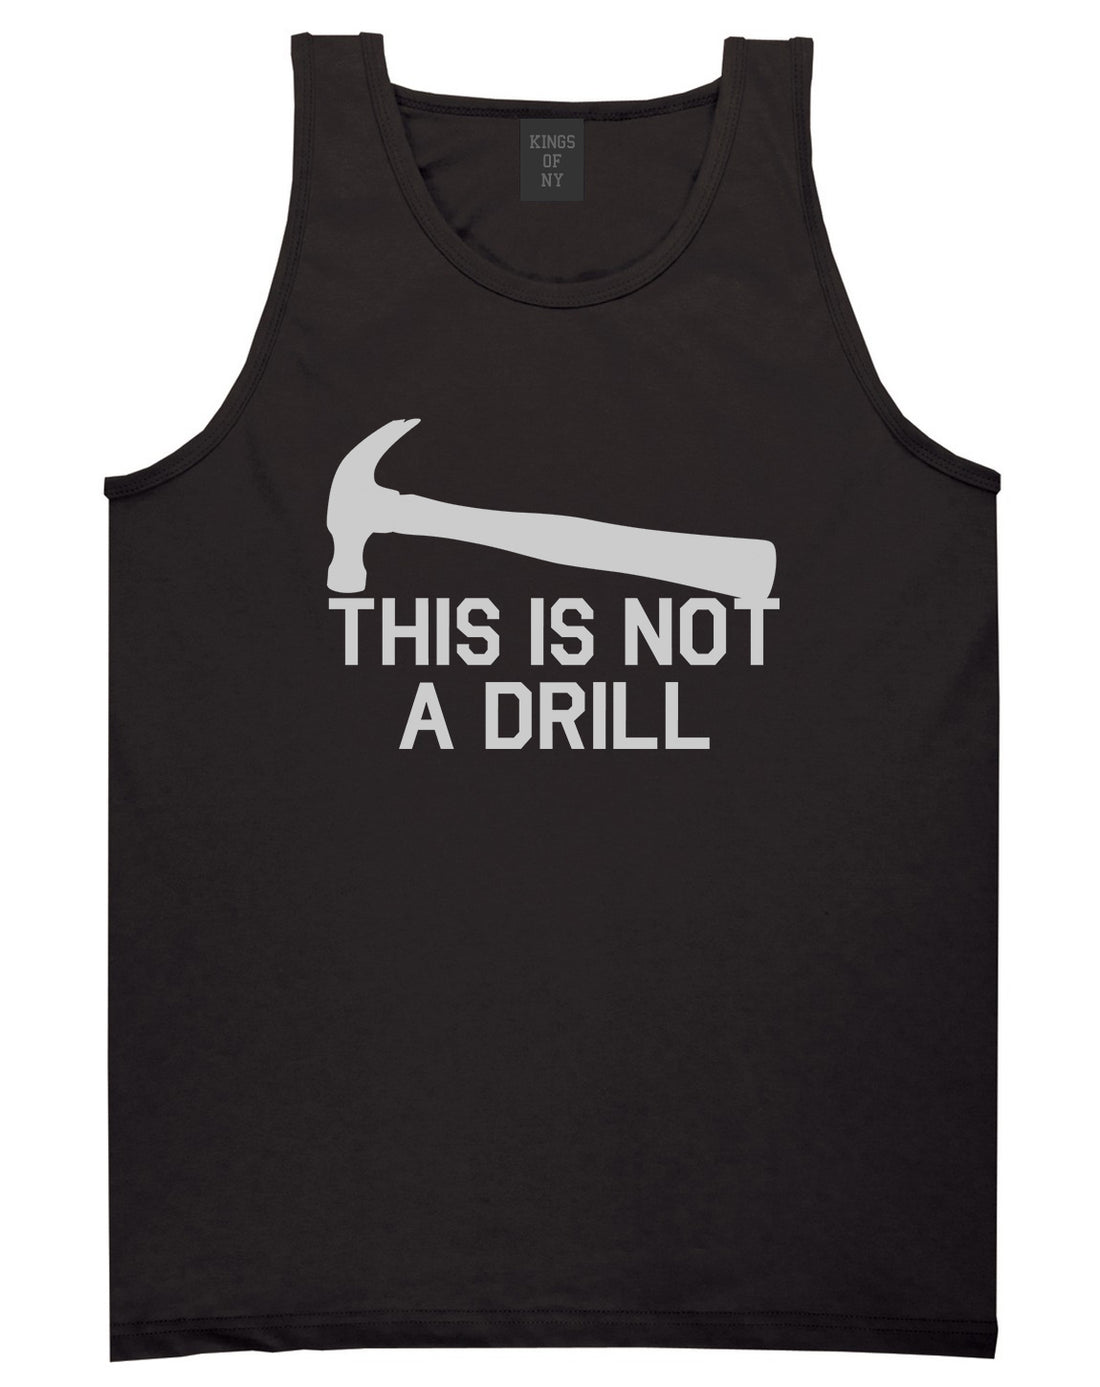 This Is Not A Drill Funny Construction Worker Mens Tank Top T-Shirt Black